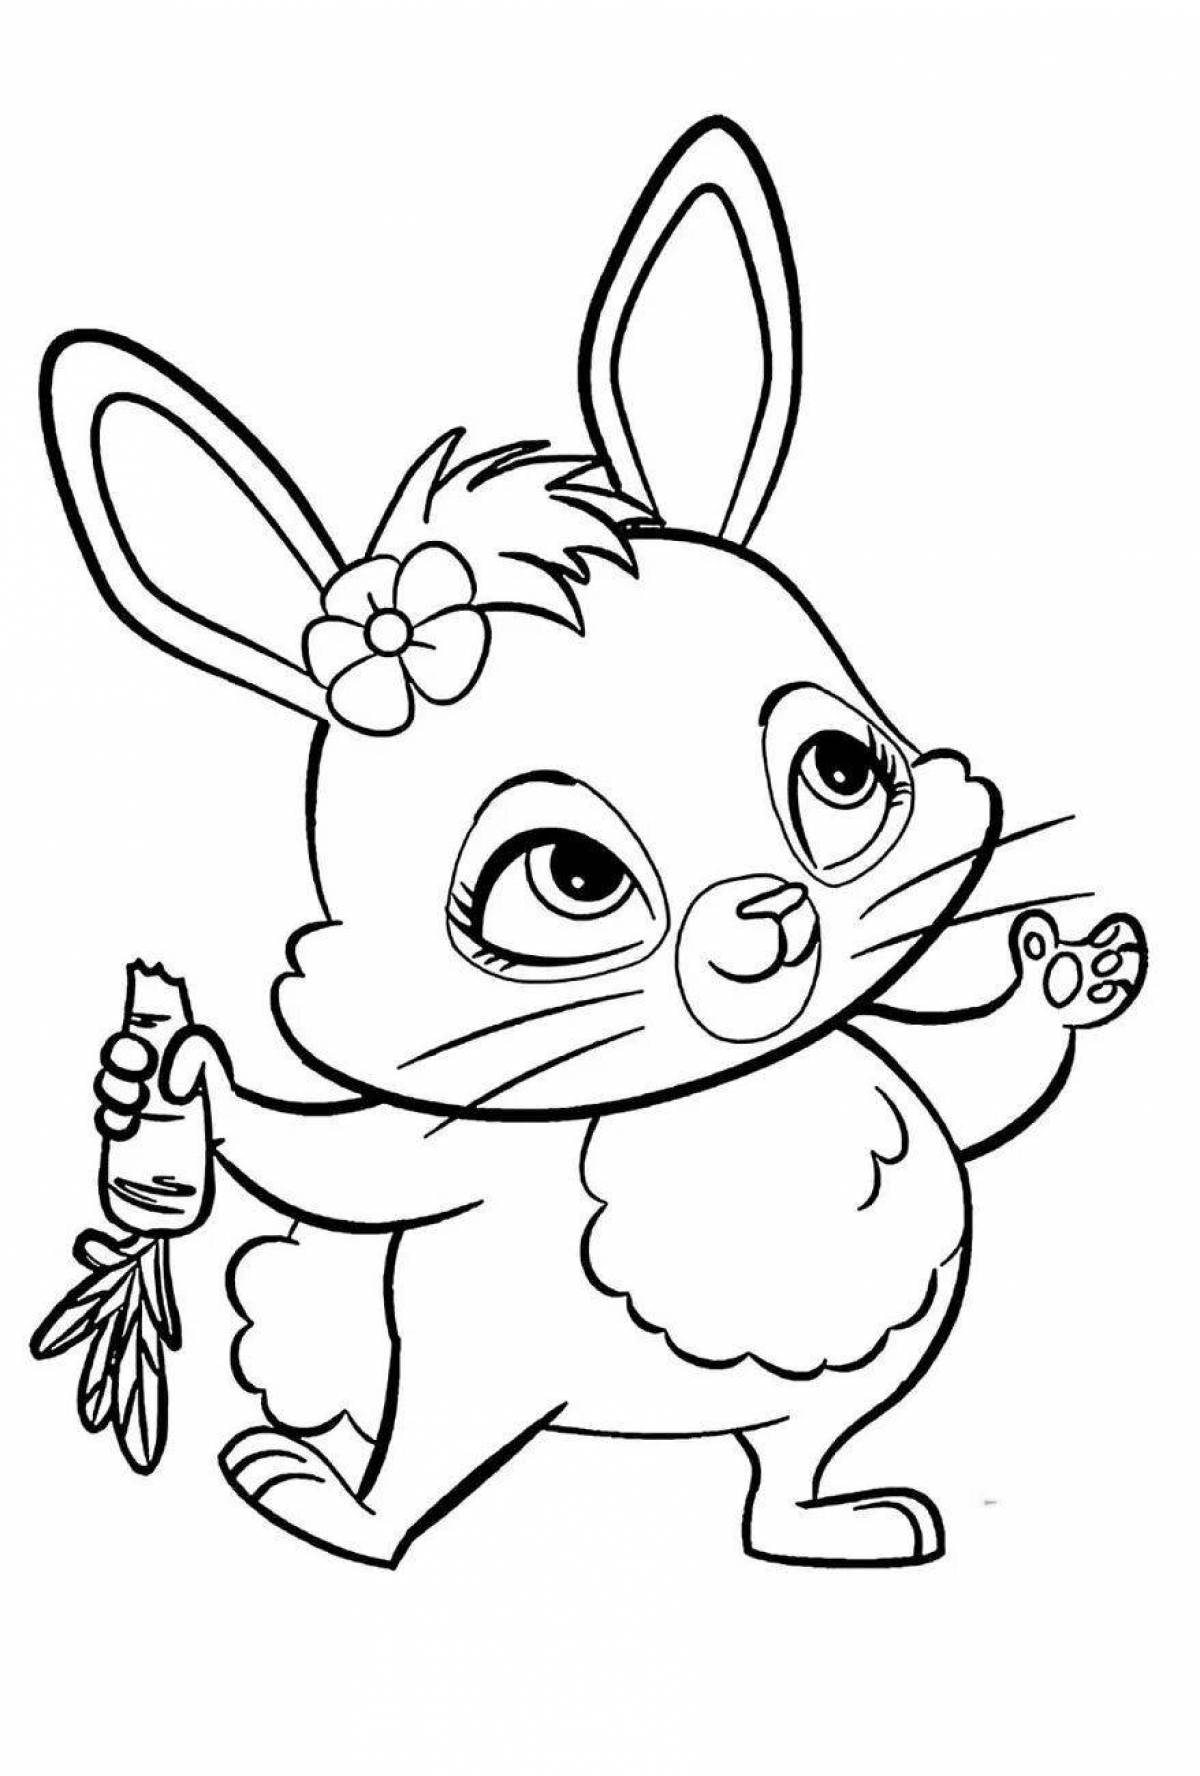 Delightful chacimol coloring pages